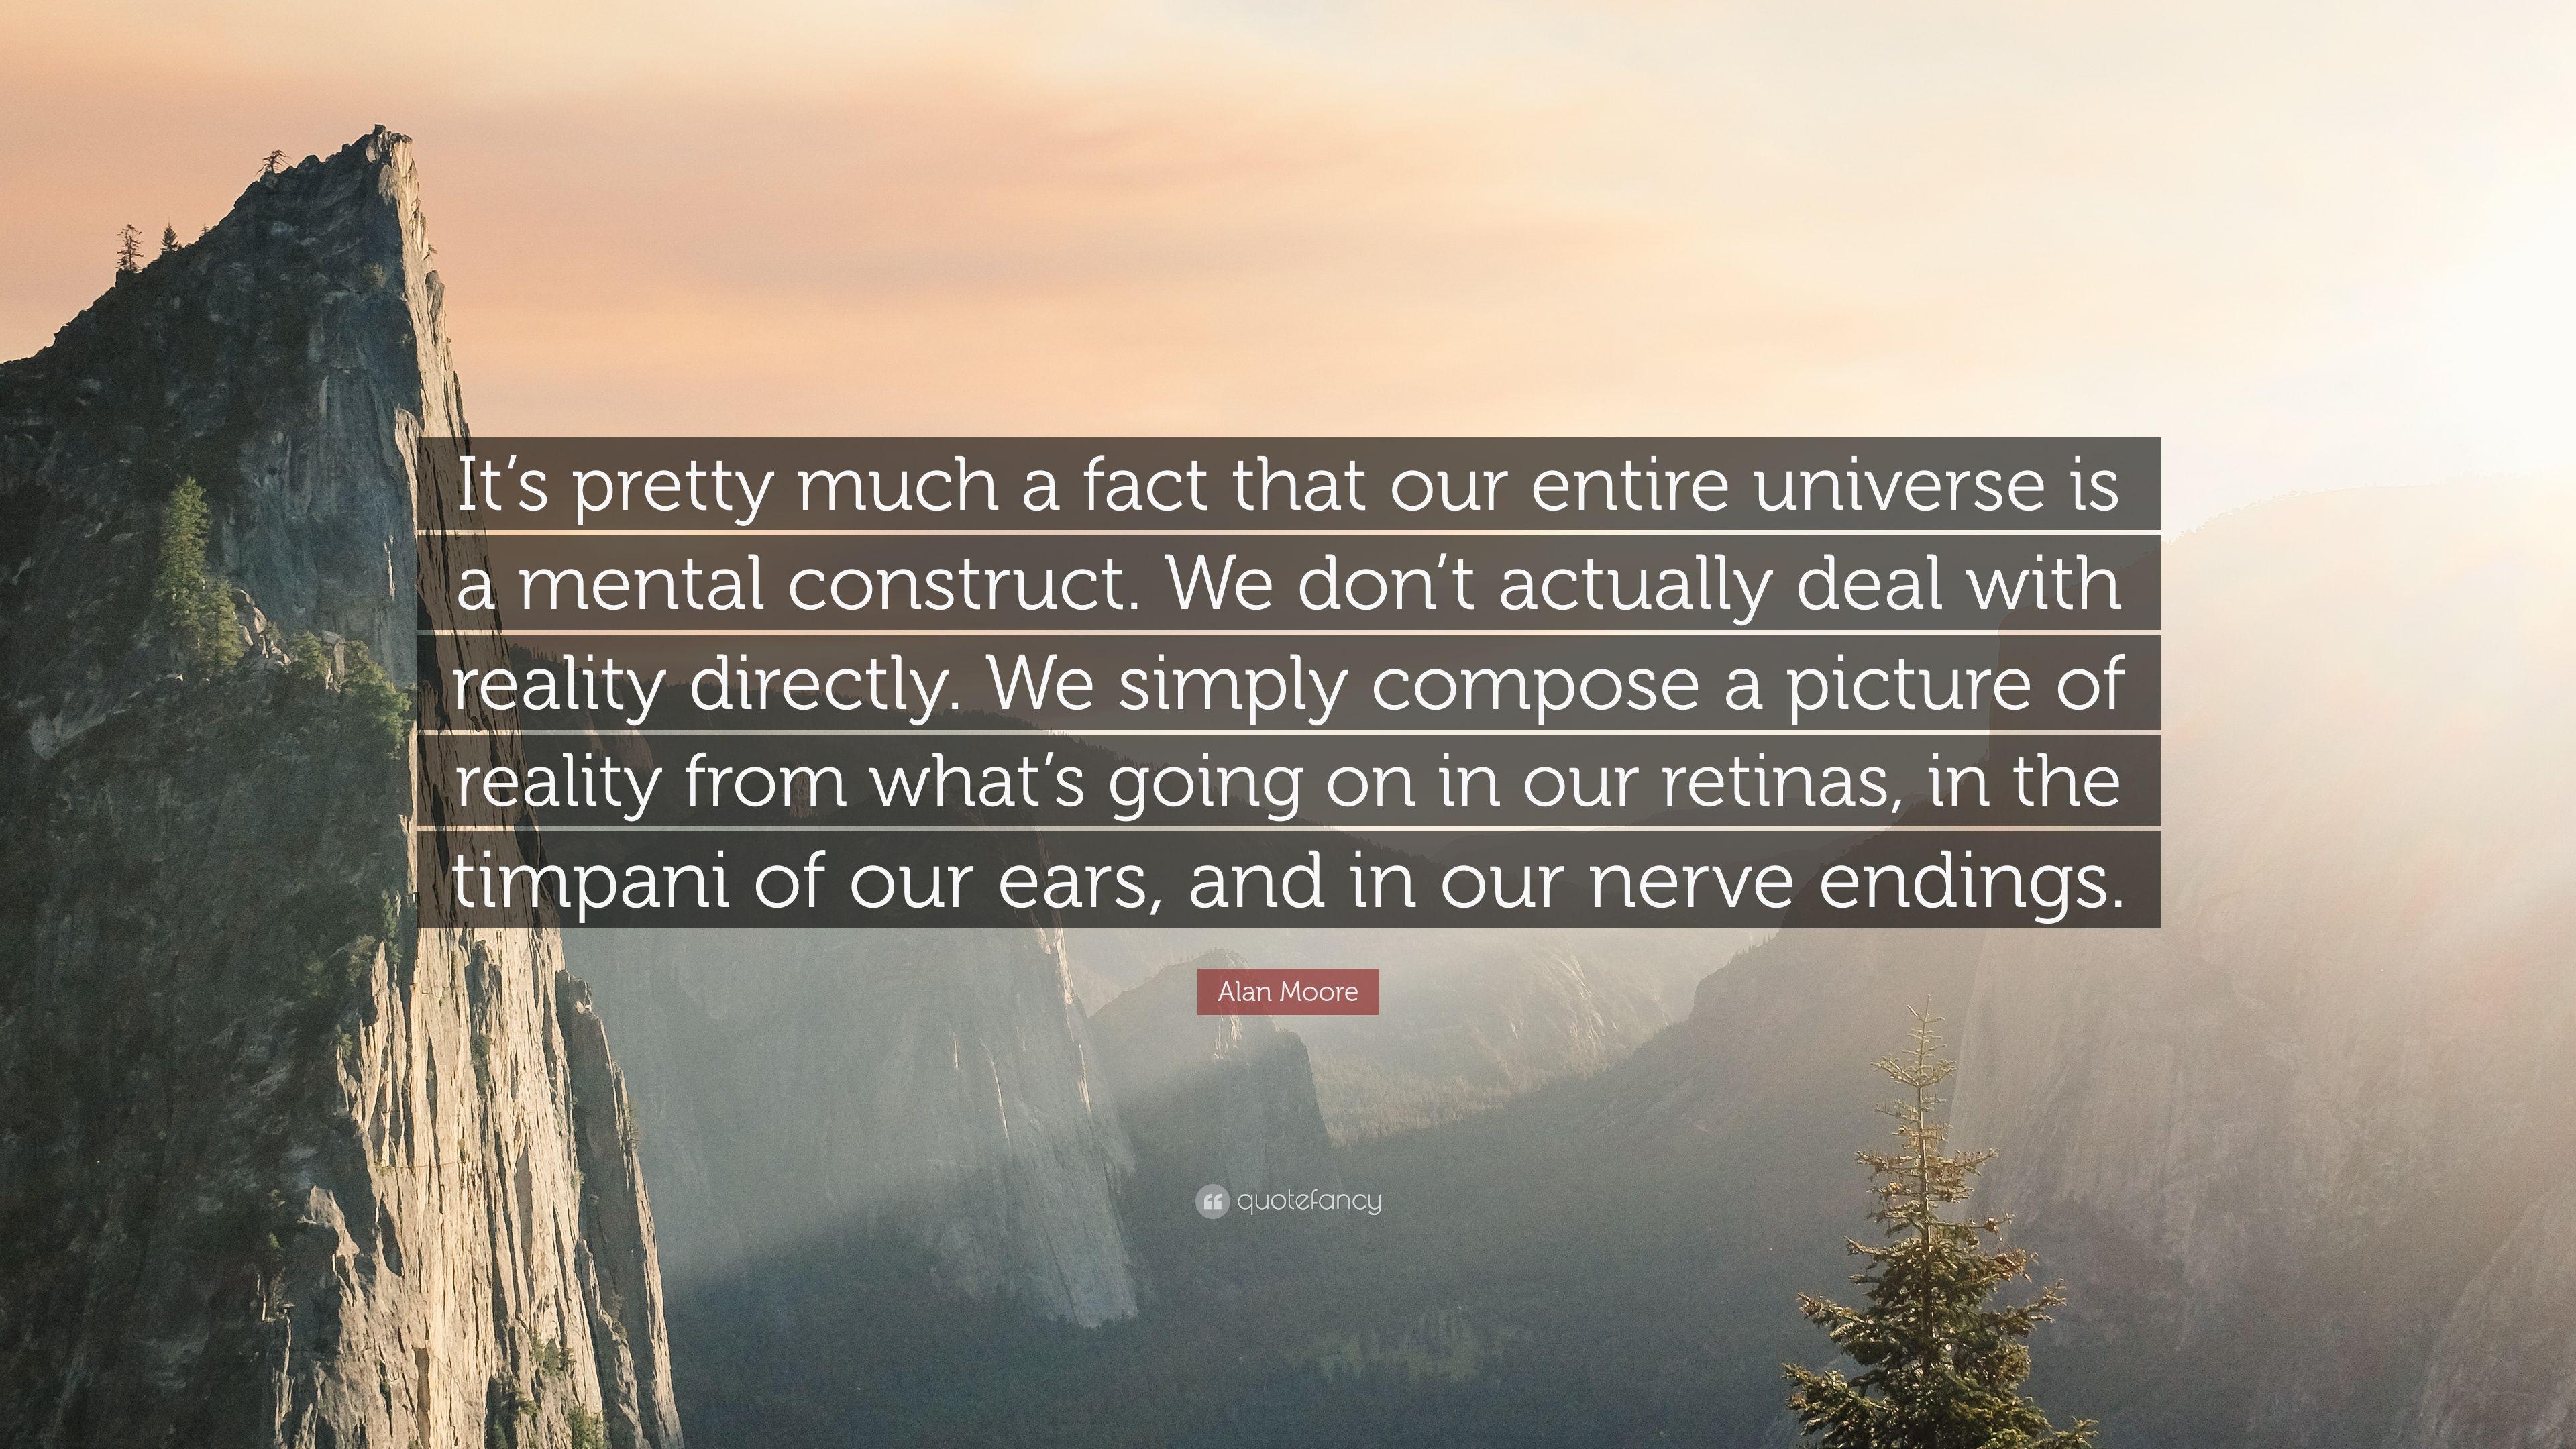 Alan Moore Quote: “It's pretty much a fact that our entire universe